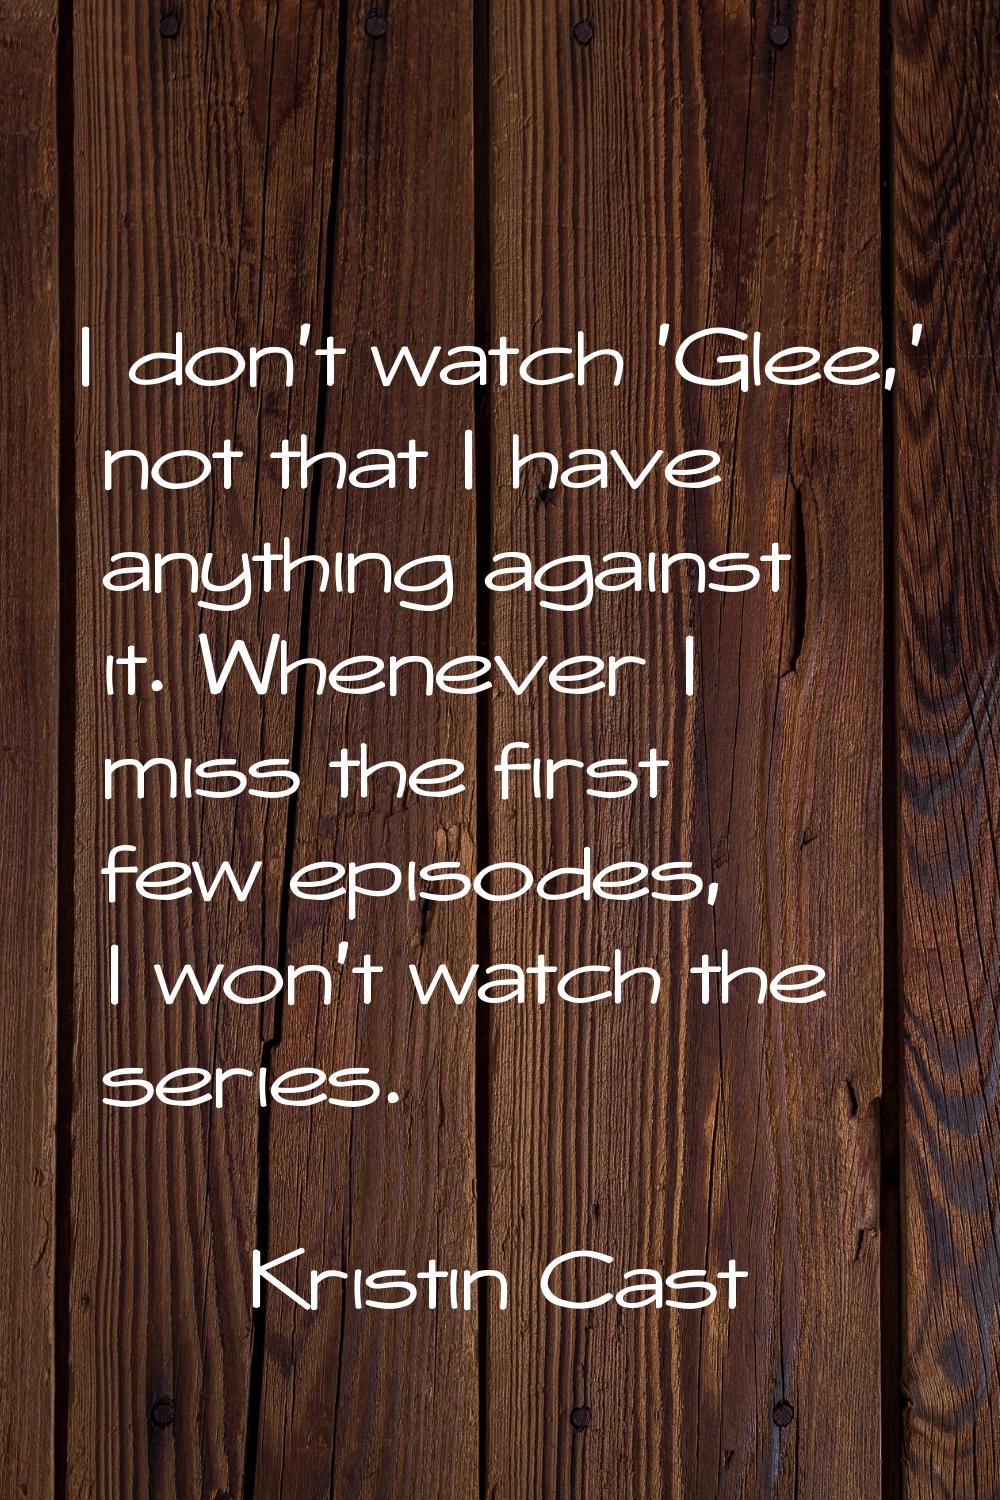 I don't watch 'Glee,' not that I have anything against it. Whenever I miss the first few episodes, 